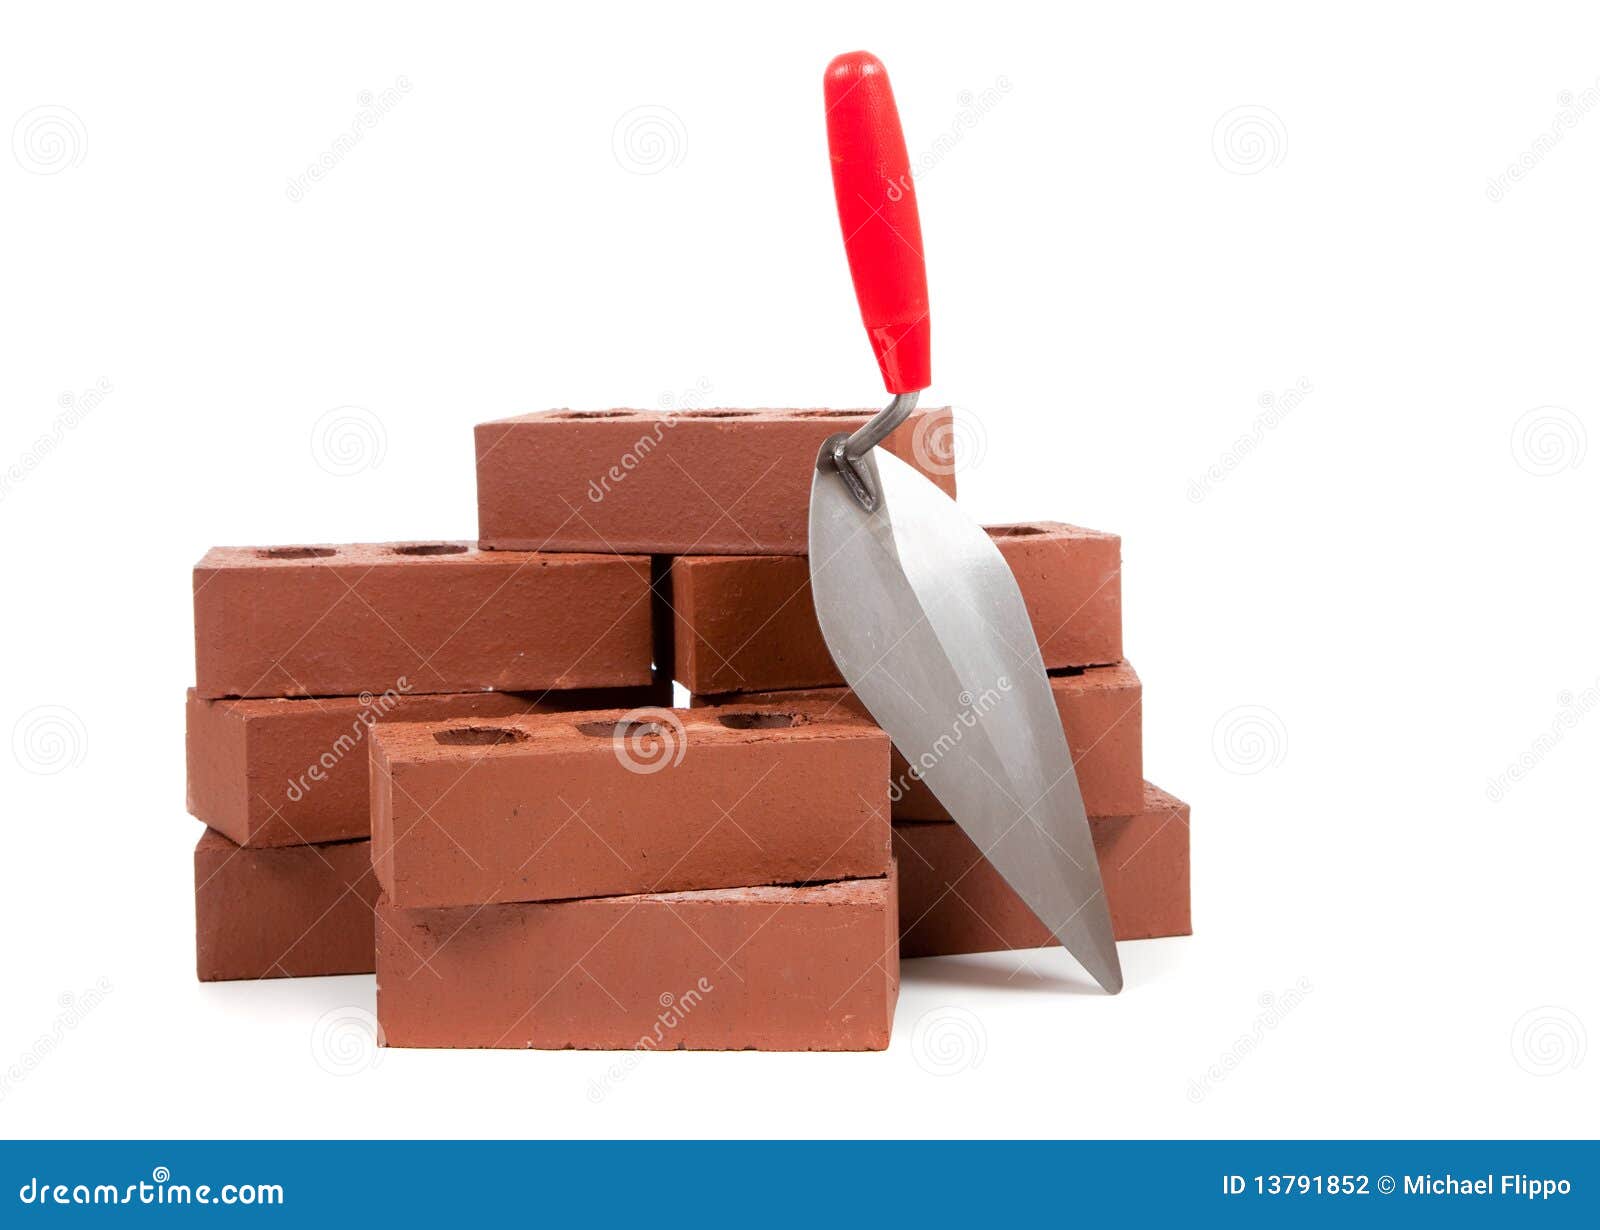 bricks and a trowel on white